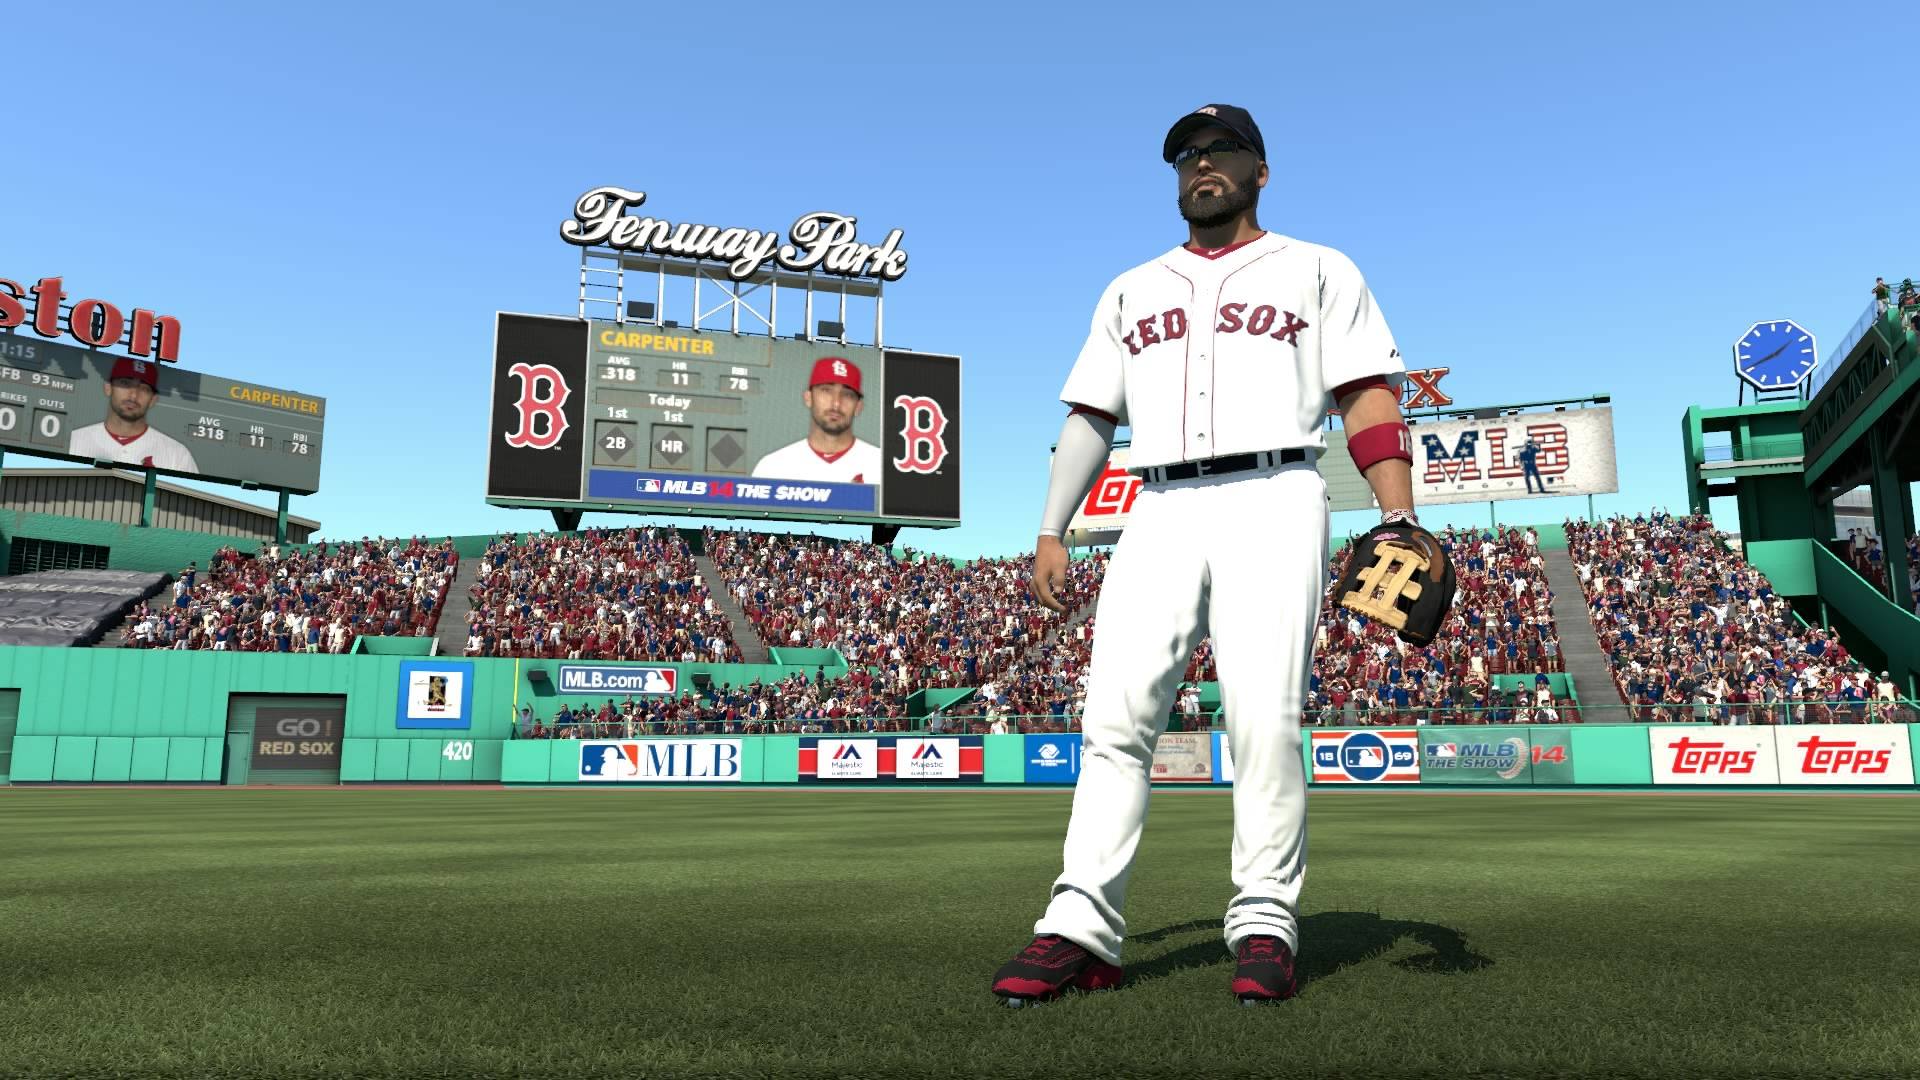 GameStop announces PS3-to-PS4 upgrade offer for MLB 14 The Show